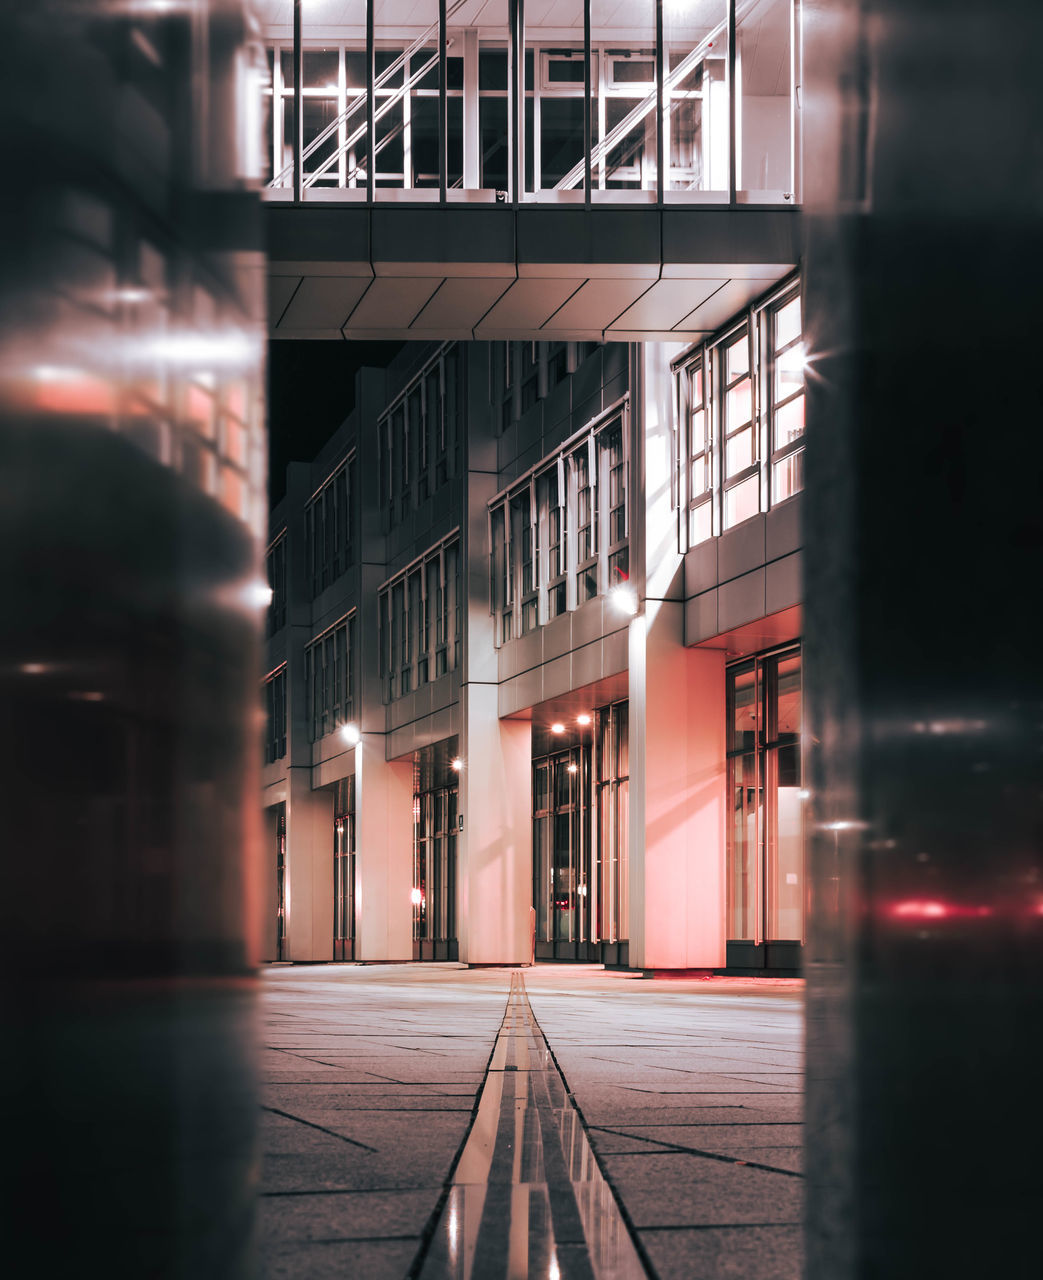 architecture, building exterior, built structure, building, illuminated, no people, night, reflection, city, glass - material, window, outdoors, selective focus, direction, blurred motion, sunset, the way forward, nature, modern, office building exterior, surface level